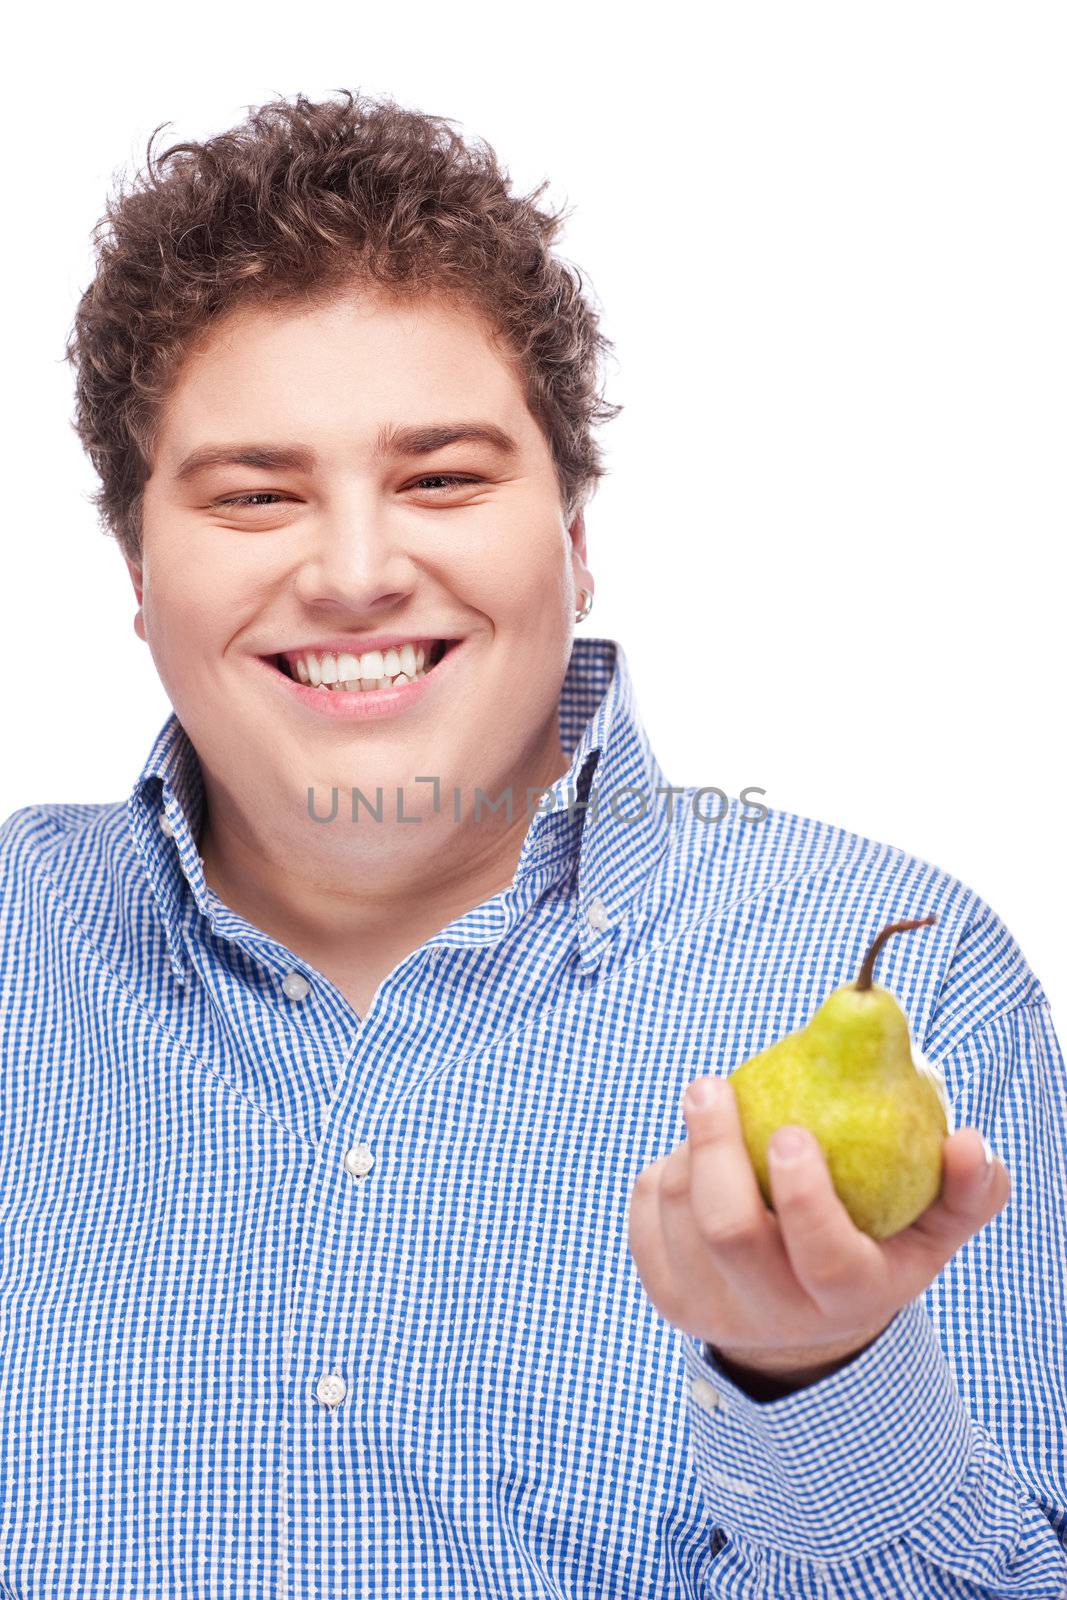 chubby man holding pear by imarin